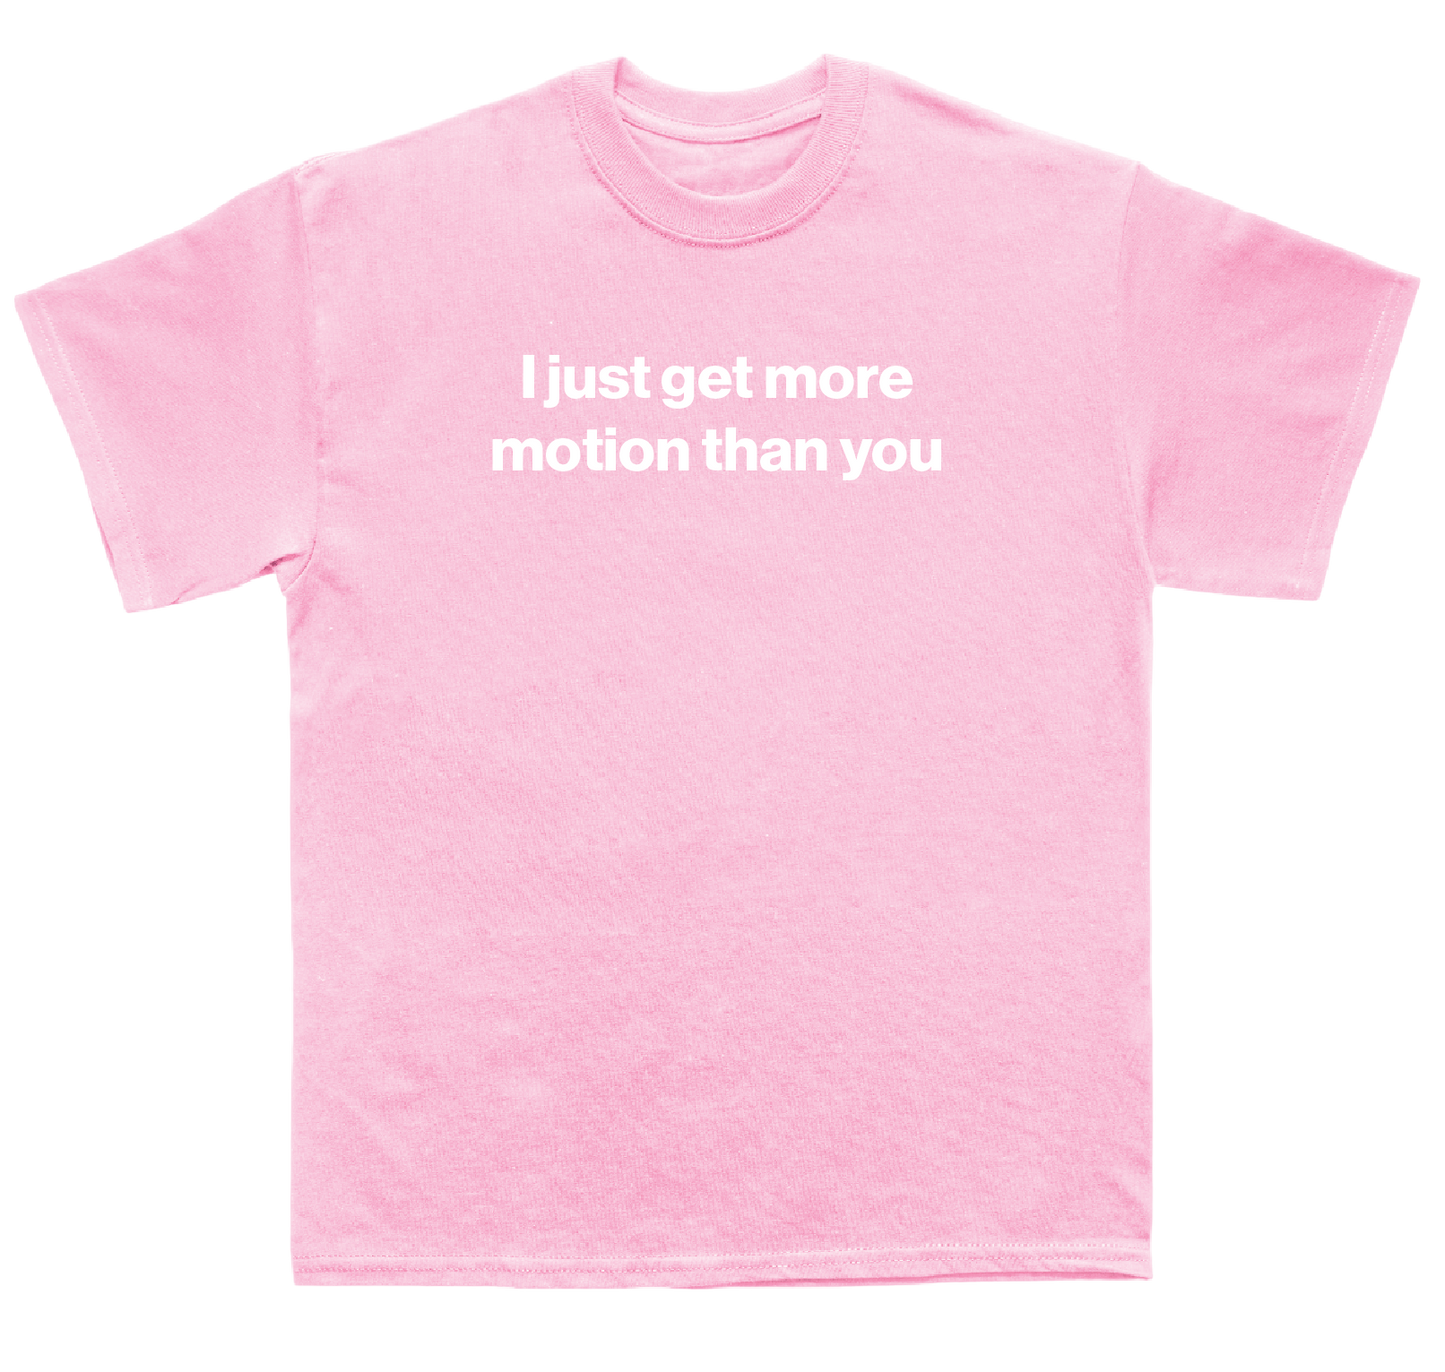 I just get more motion than you shirt